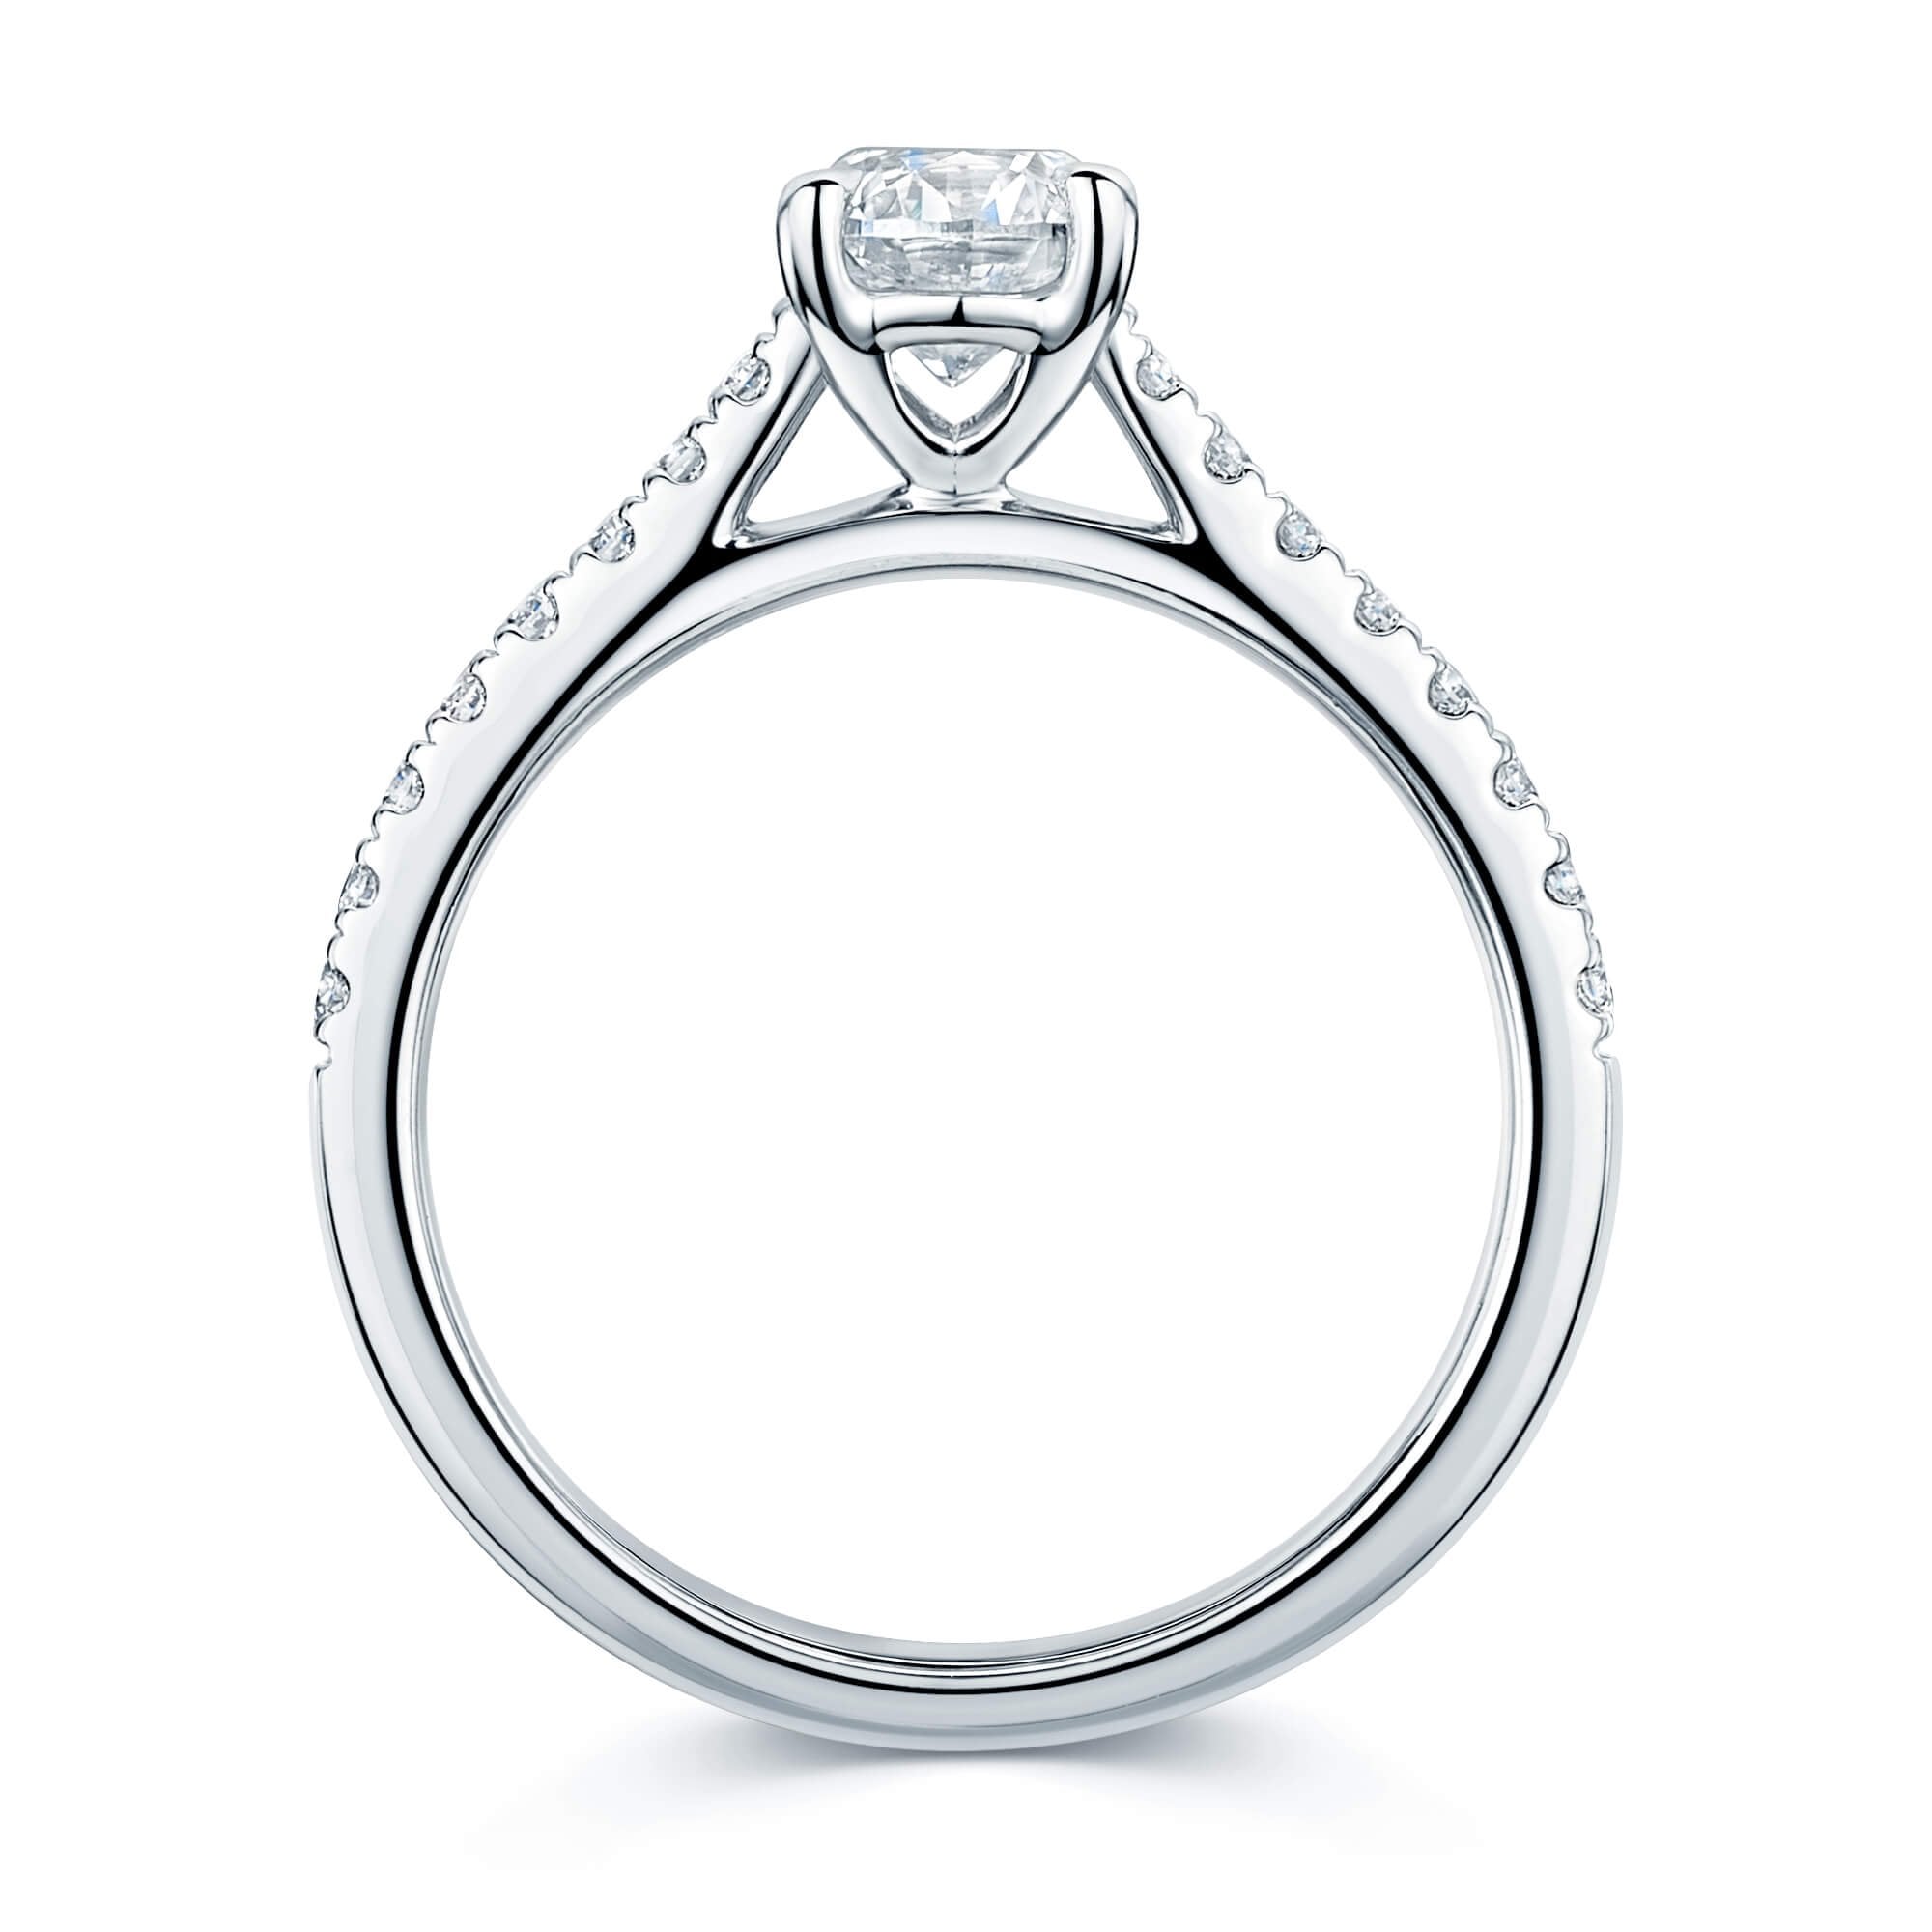 Simply Solitaire Collection Platinum Set Diamond Solitaire Engagement Ring With Diamond Shoulders GIA Certified 0.70 Carat